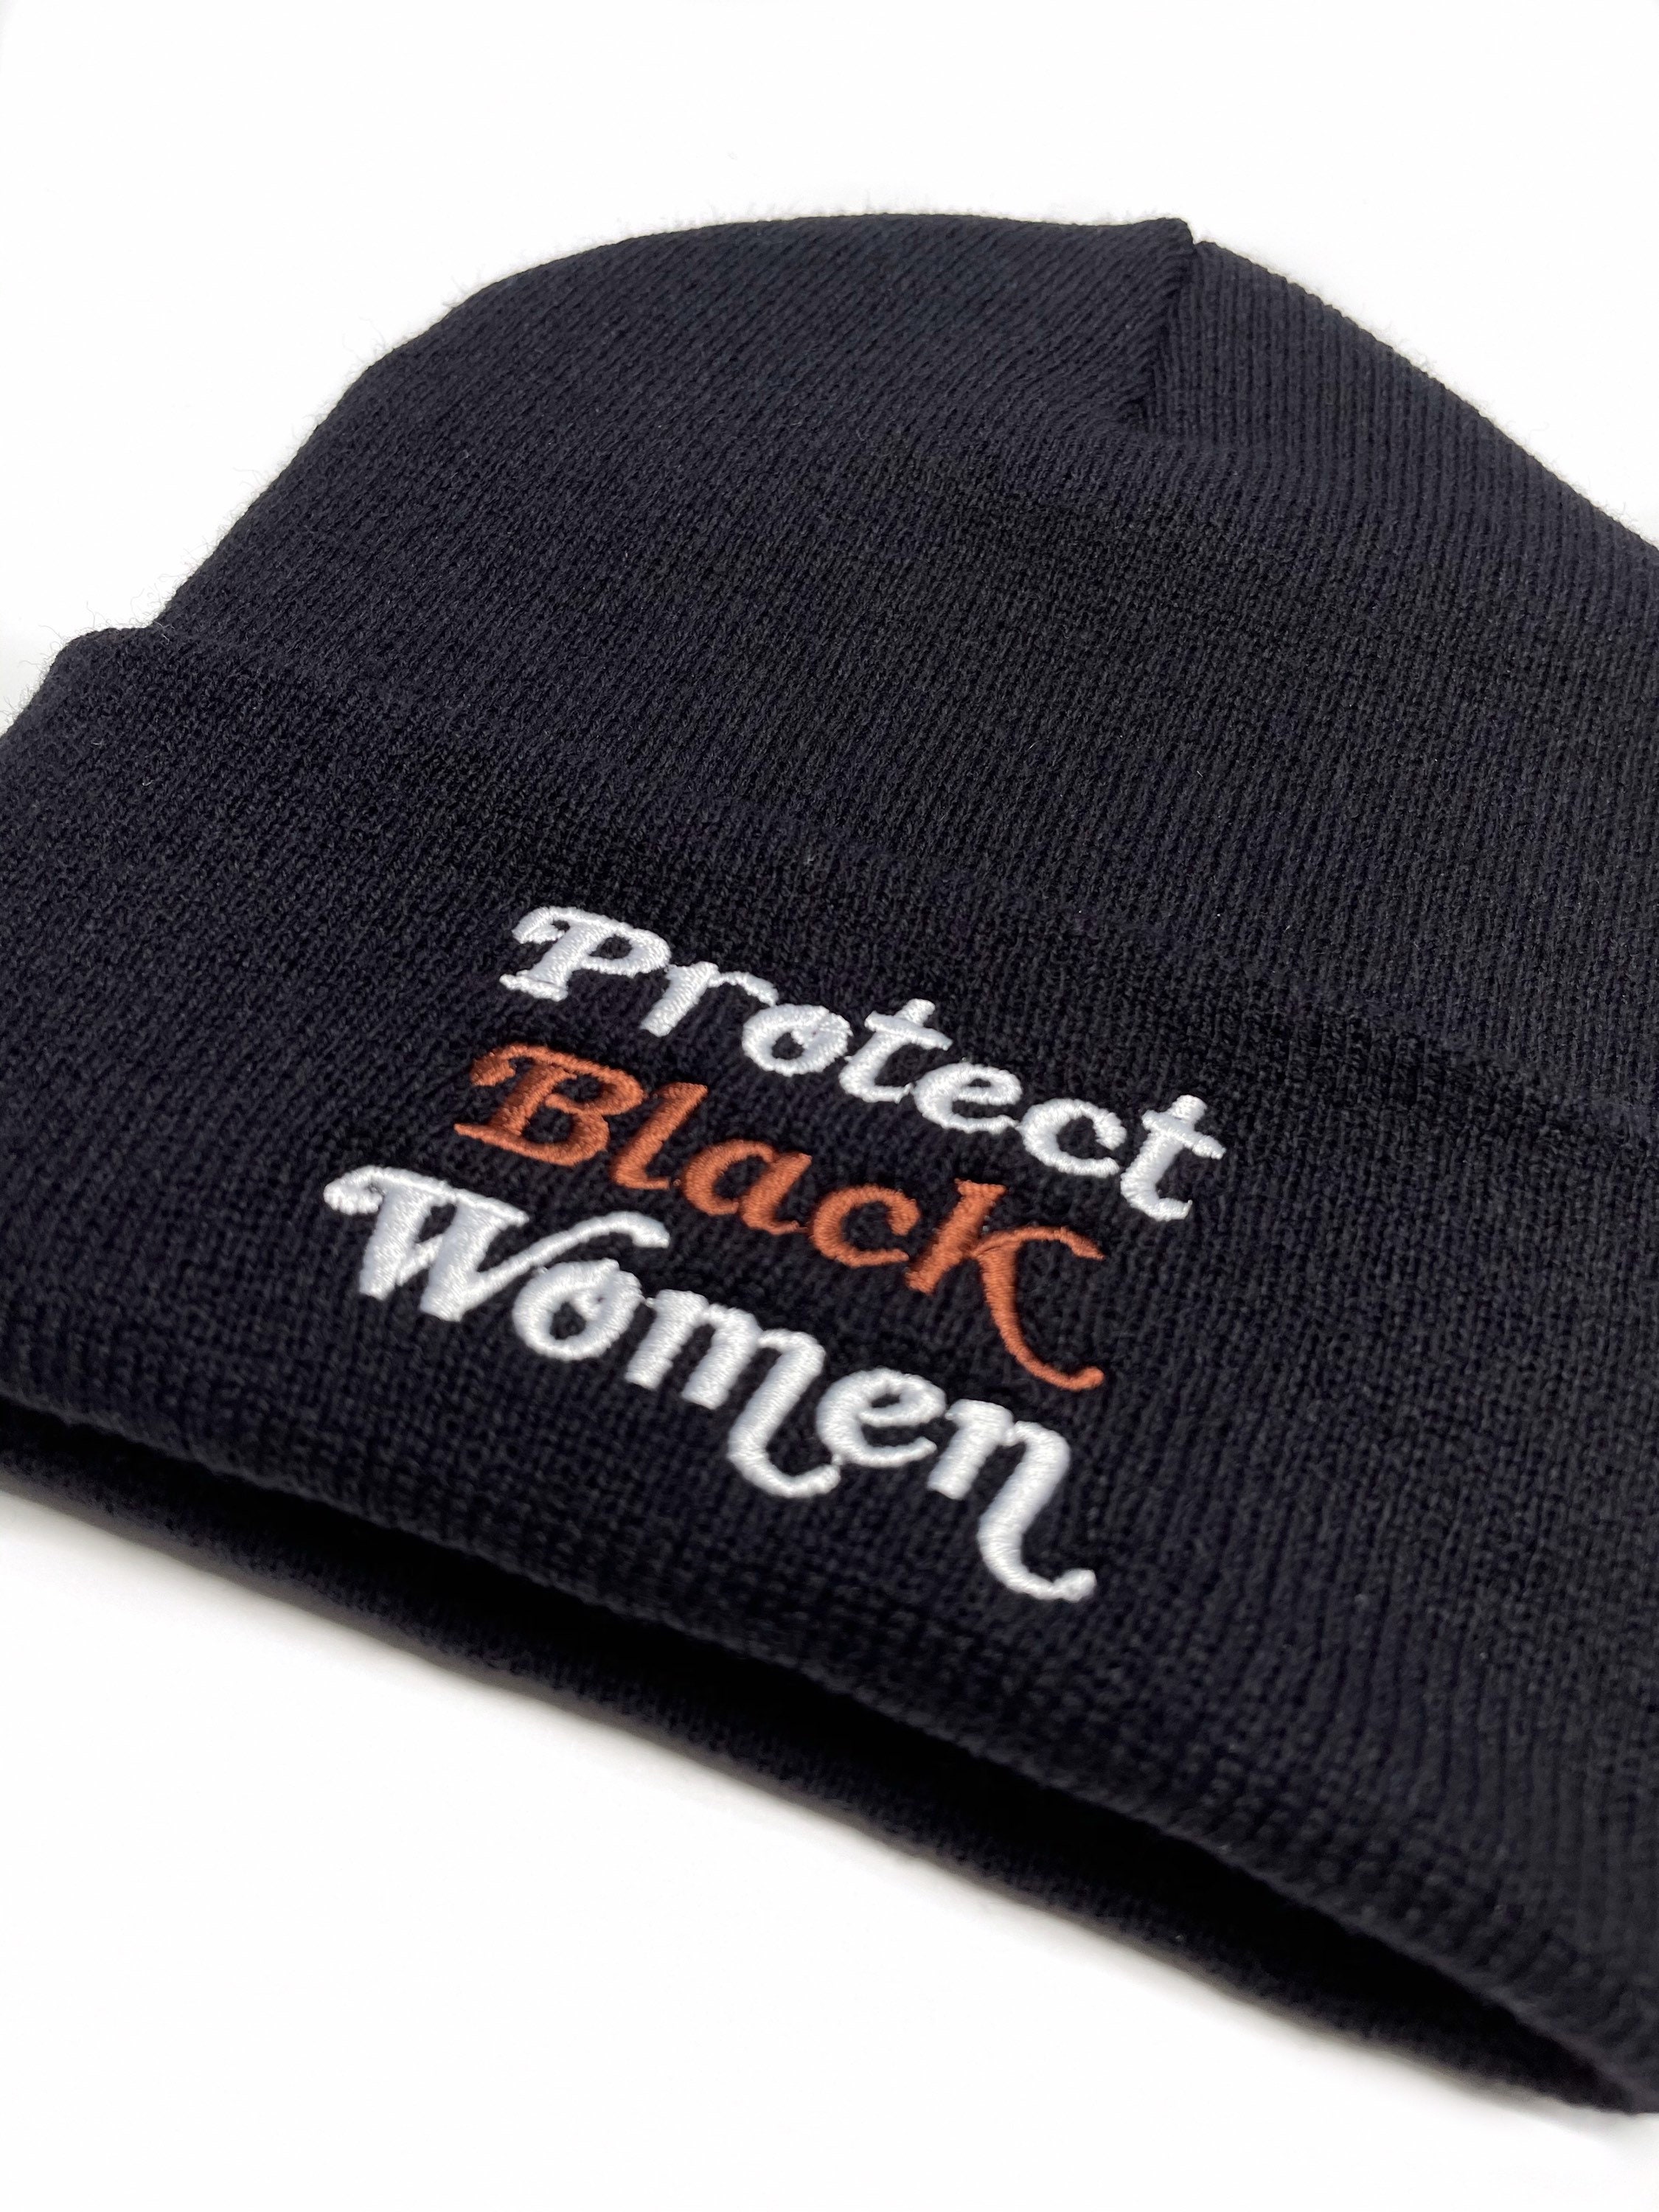 Protect Black Women Beanie. Black Owned Shop. Her Life Matters